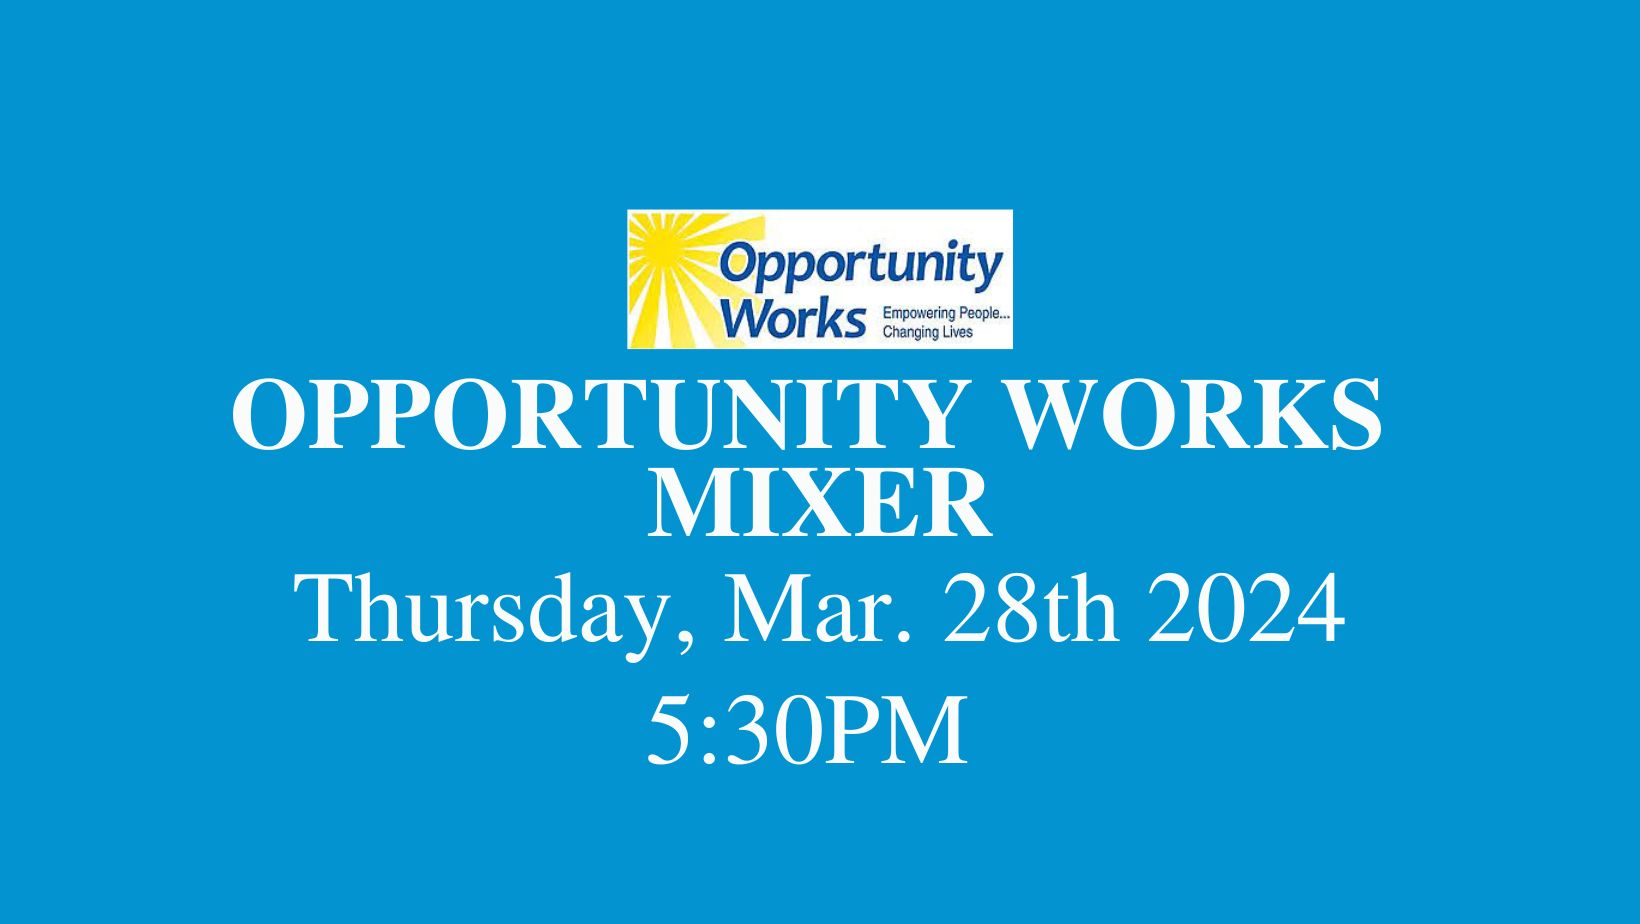 Join us for the Opportunity Works Mixer Event on Thursday, March 28th, 2024 at 5:30 pm. Come and connect with like-minded individuals - a fantastic way to network and discover new opportunities. Don't miss out!